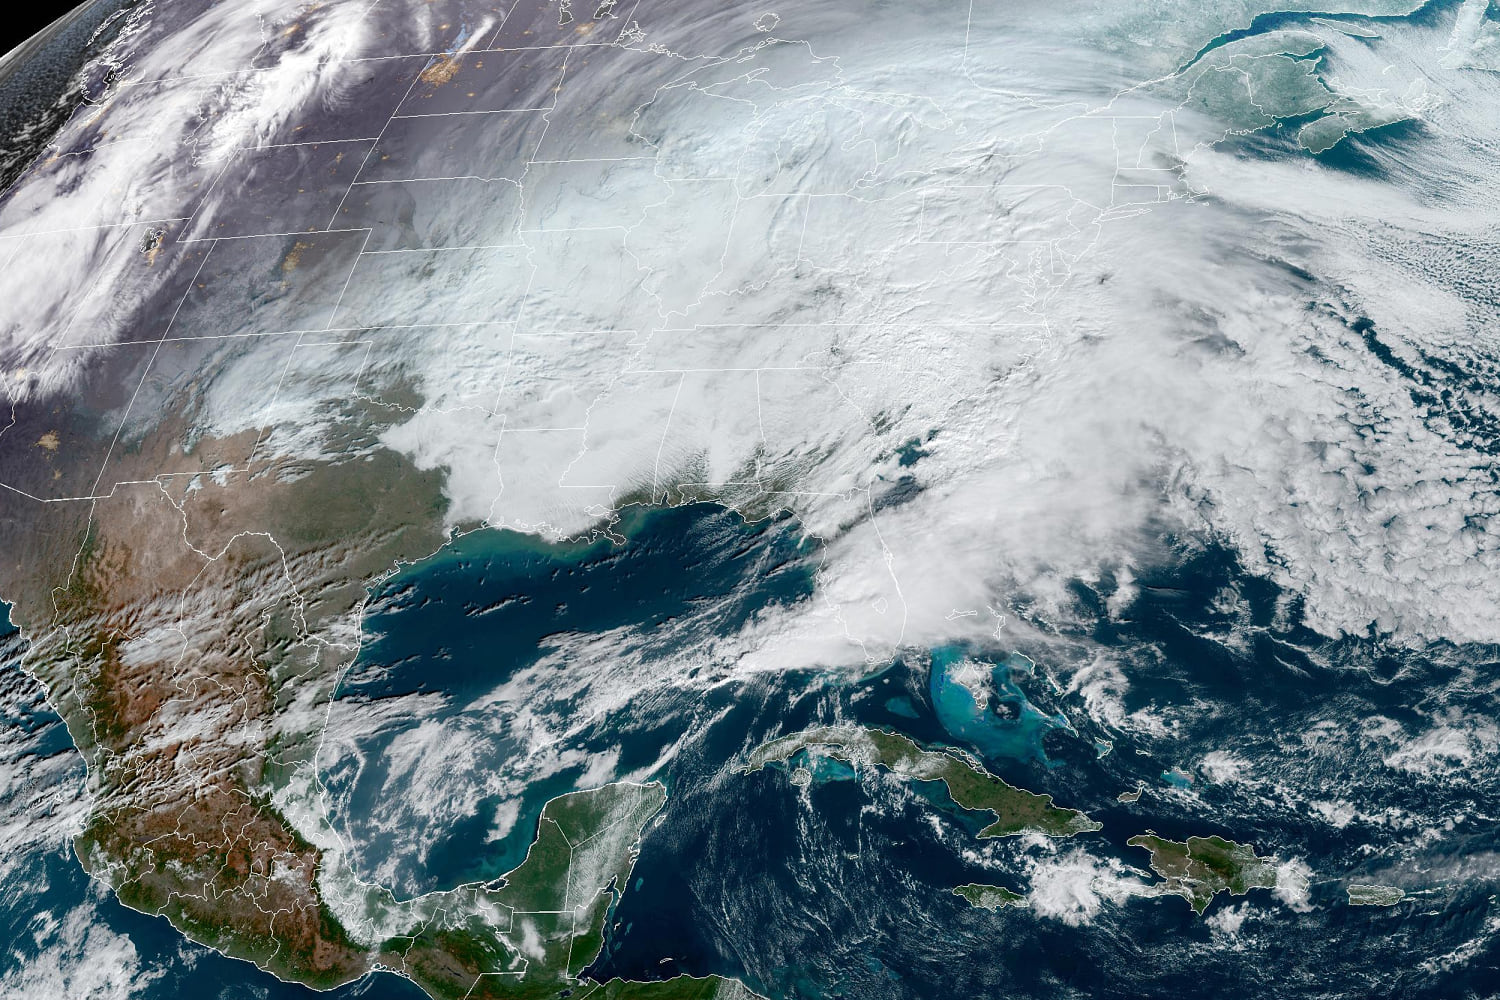 Winter storm brings snow, sleet and rain to the Northeast